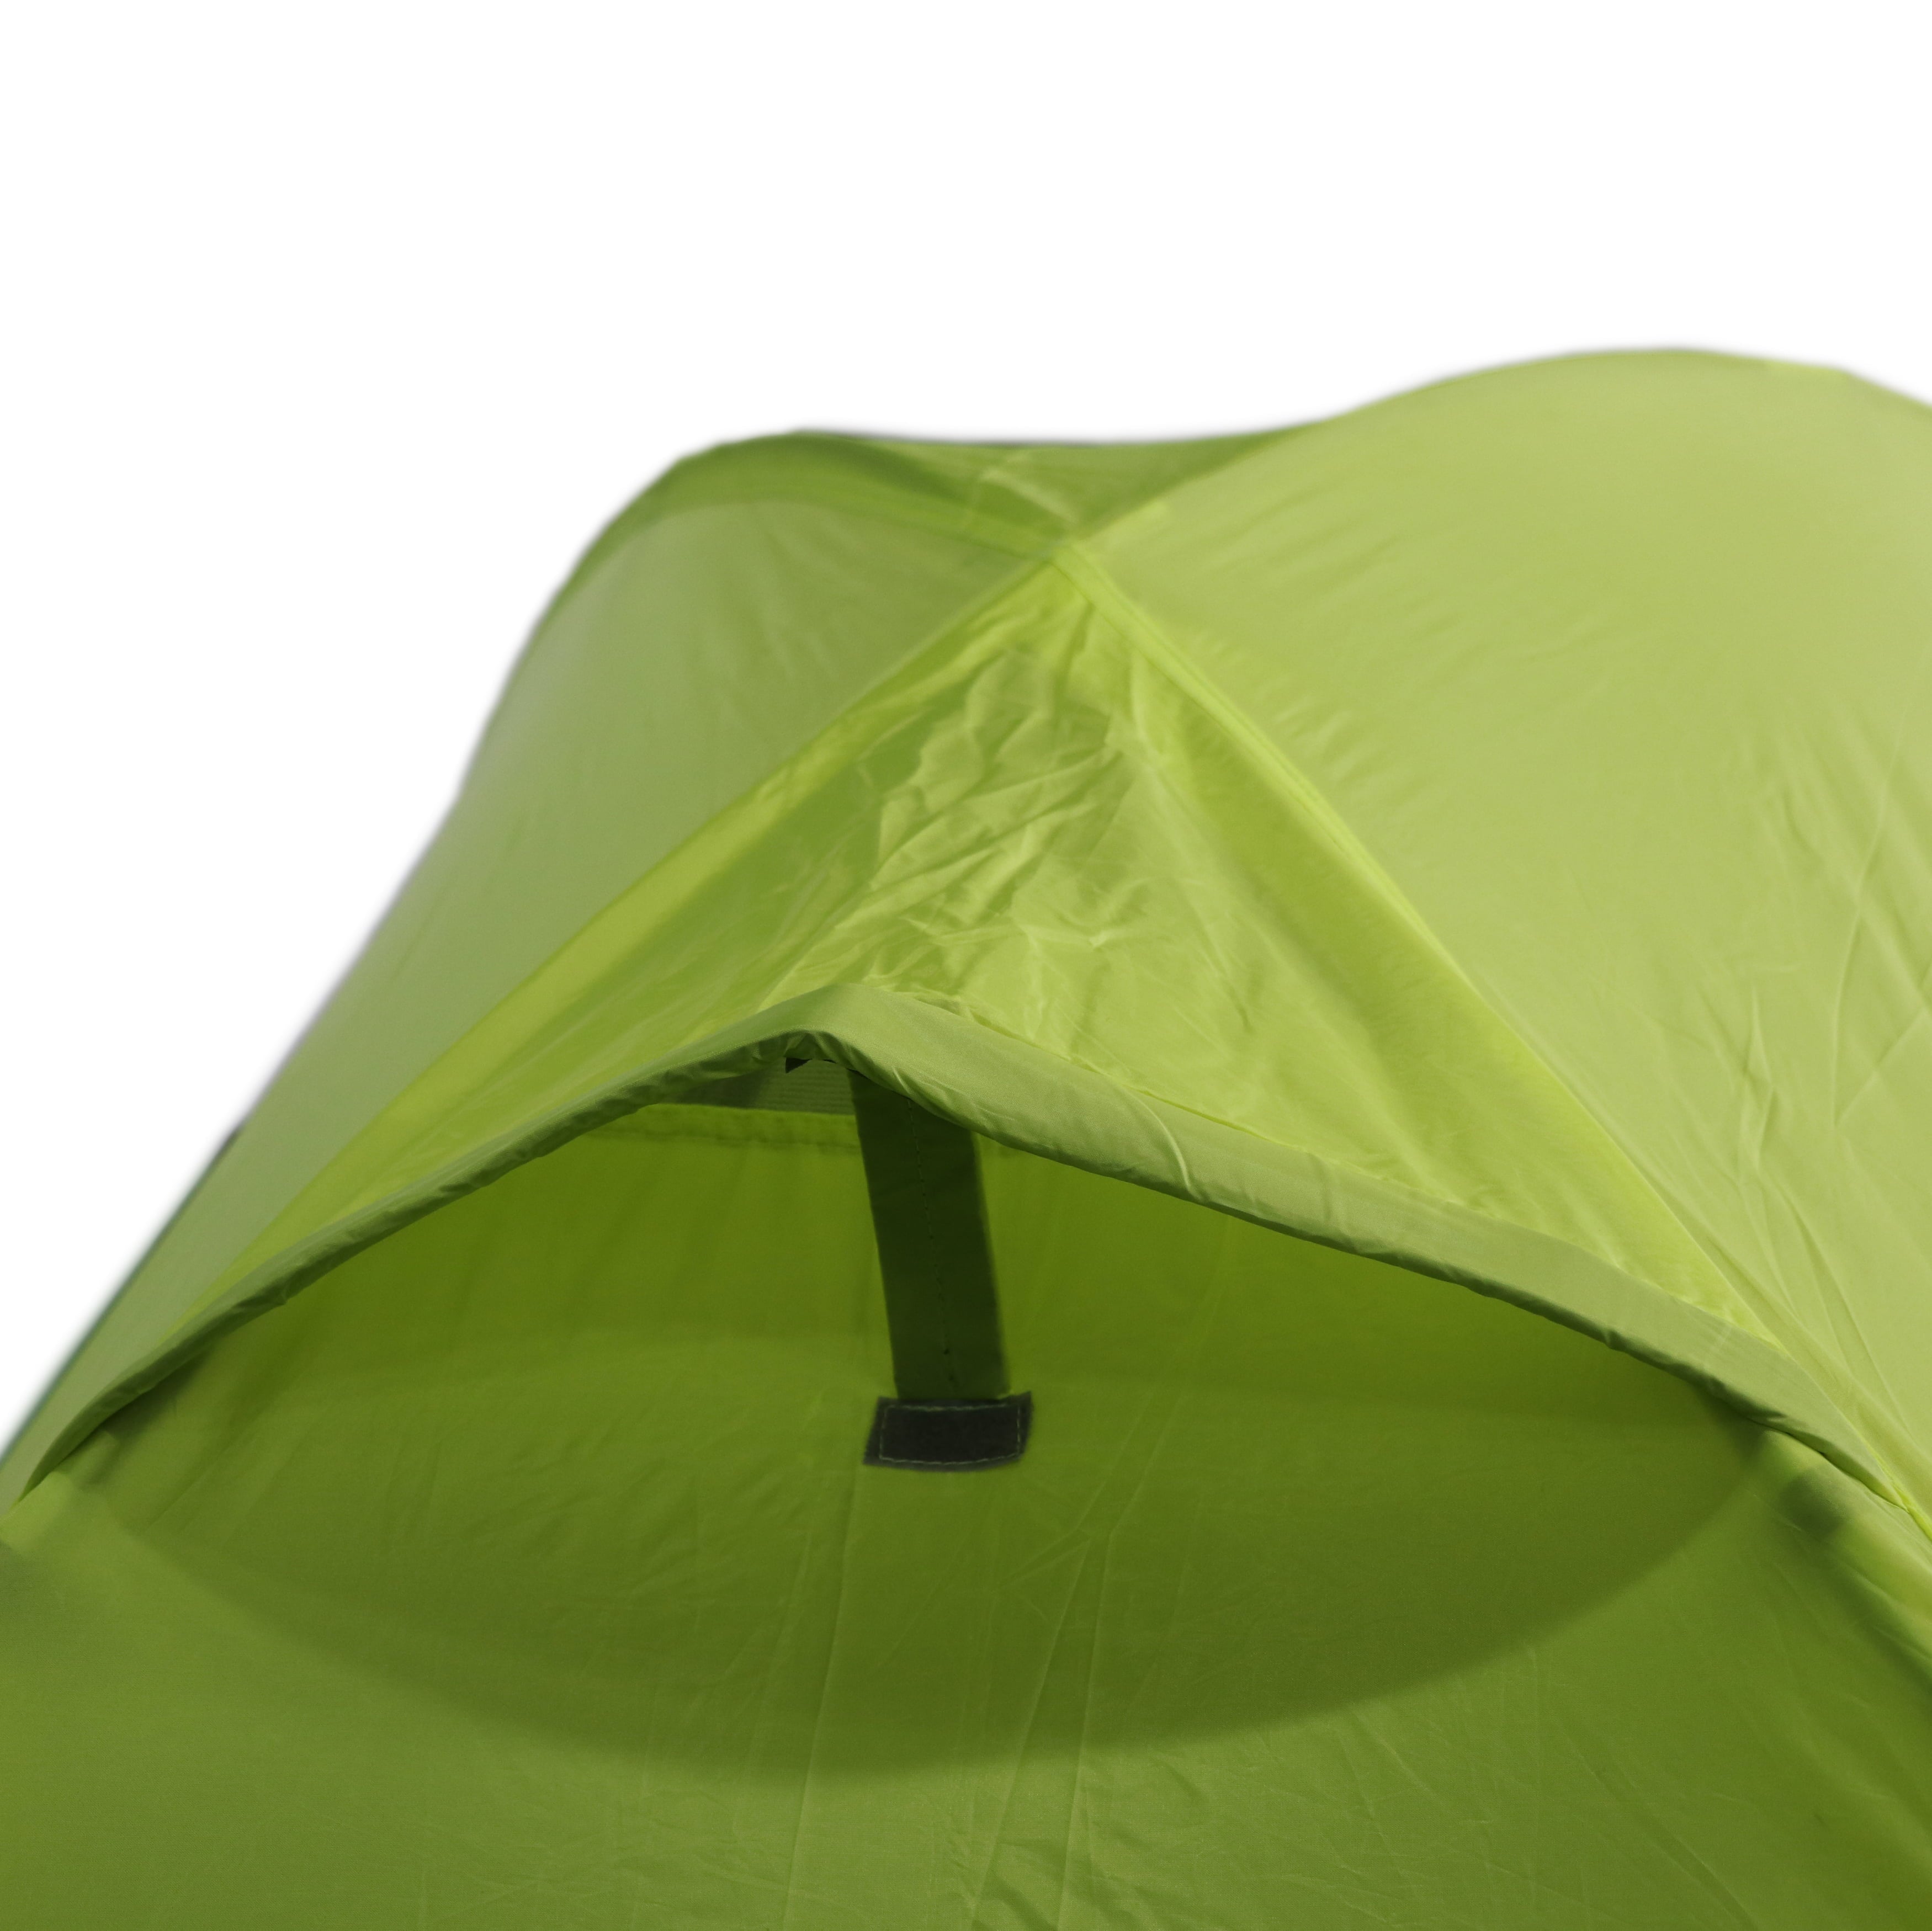 Ozark Trail 2 Person Lightweight Backpacking Tent